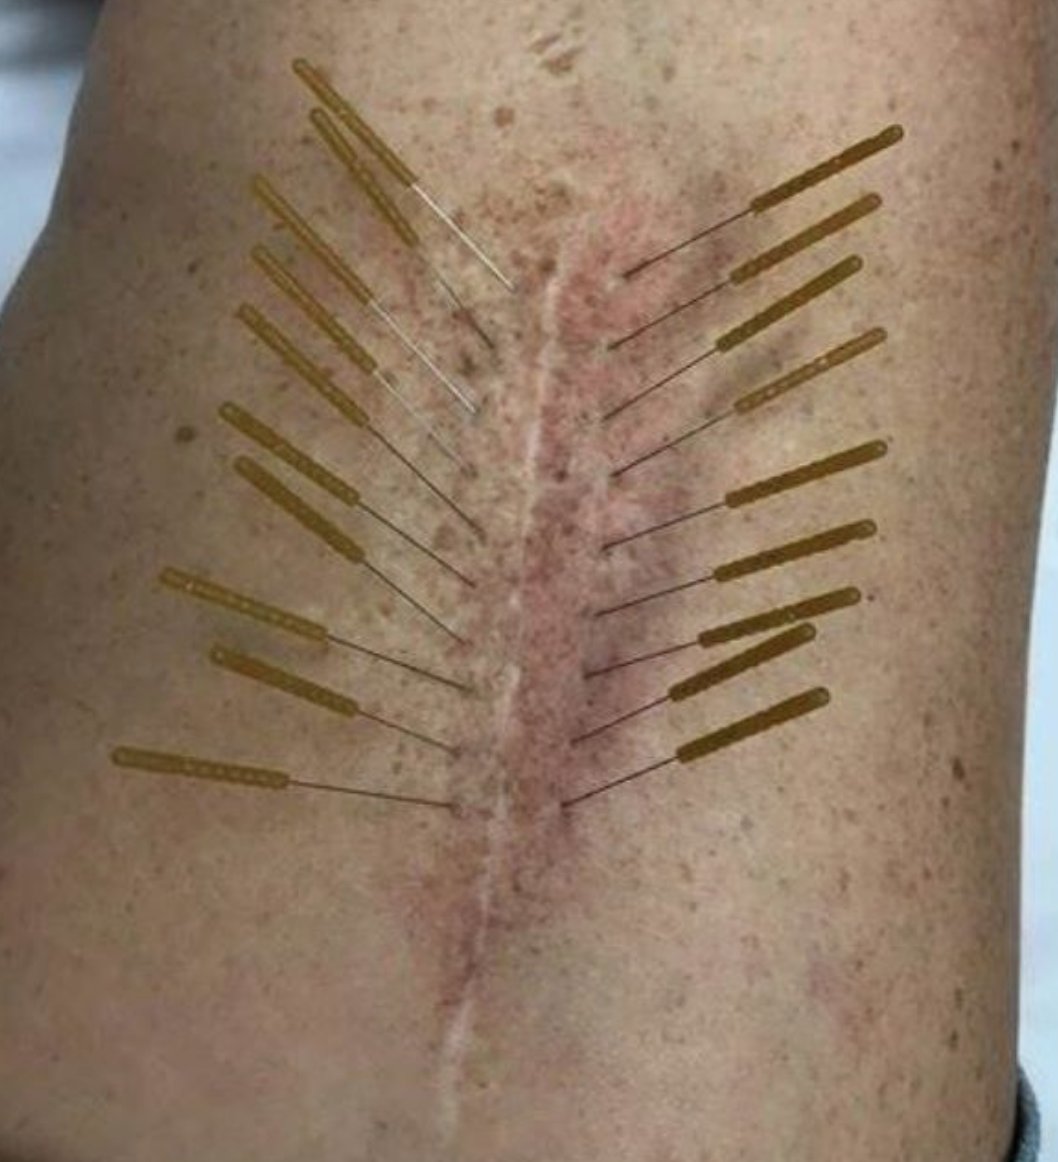 https://iaom-us.com/deep-dry-needling-may-be-more-effective-in-treating-spi...